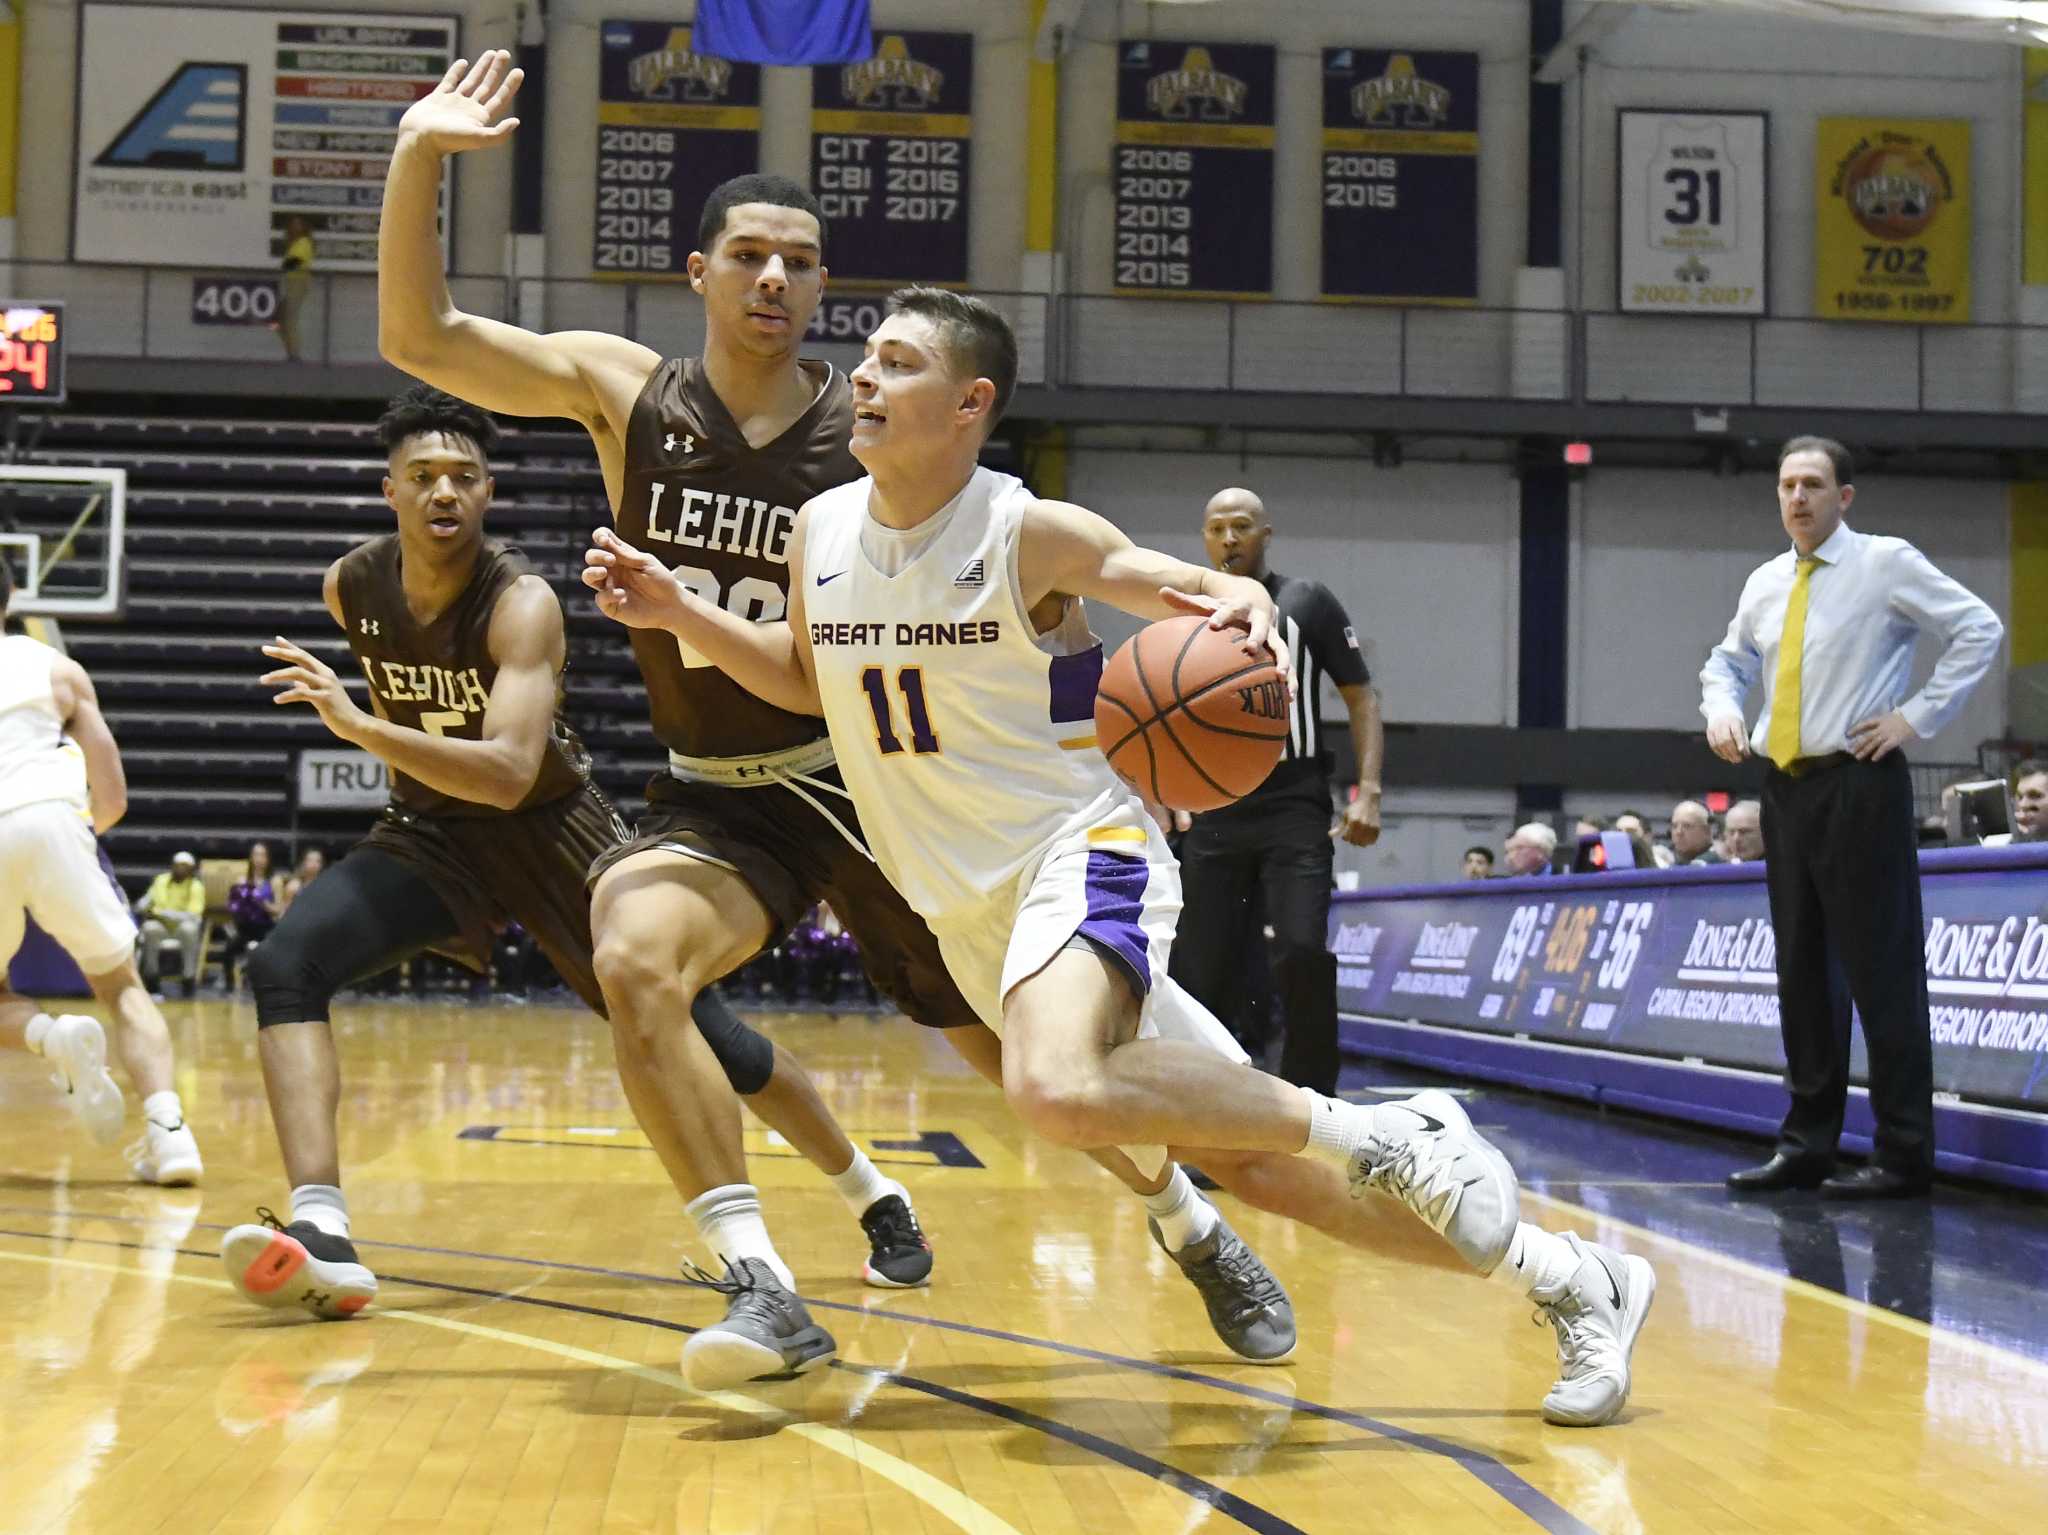 Late rally falls short as UAlbany loses opener